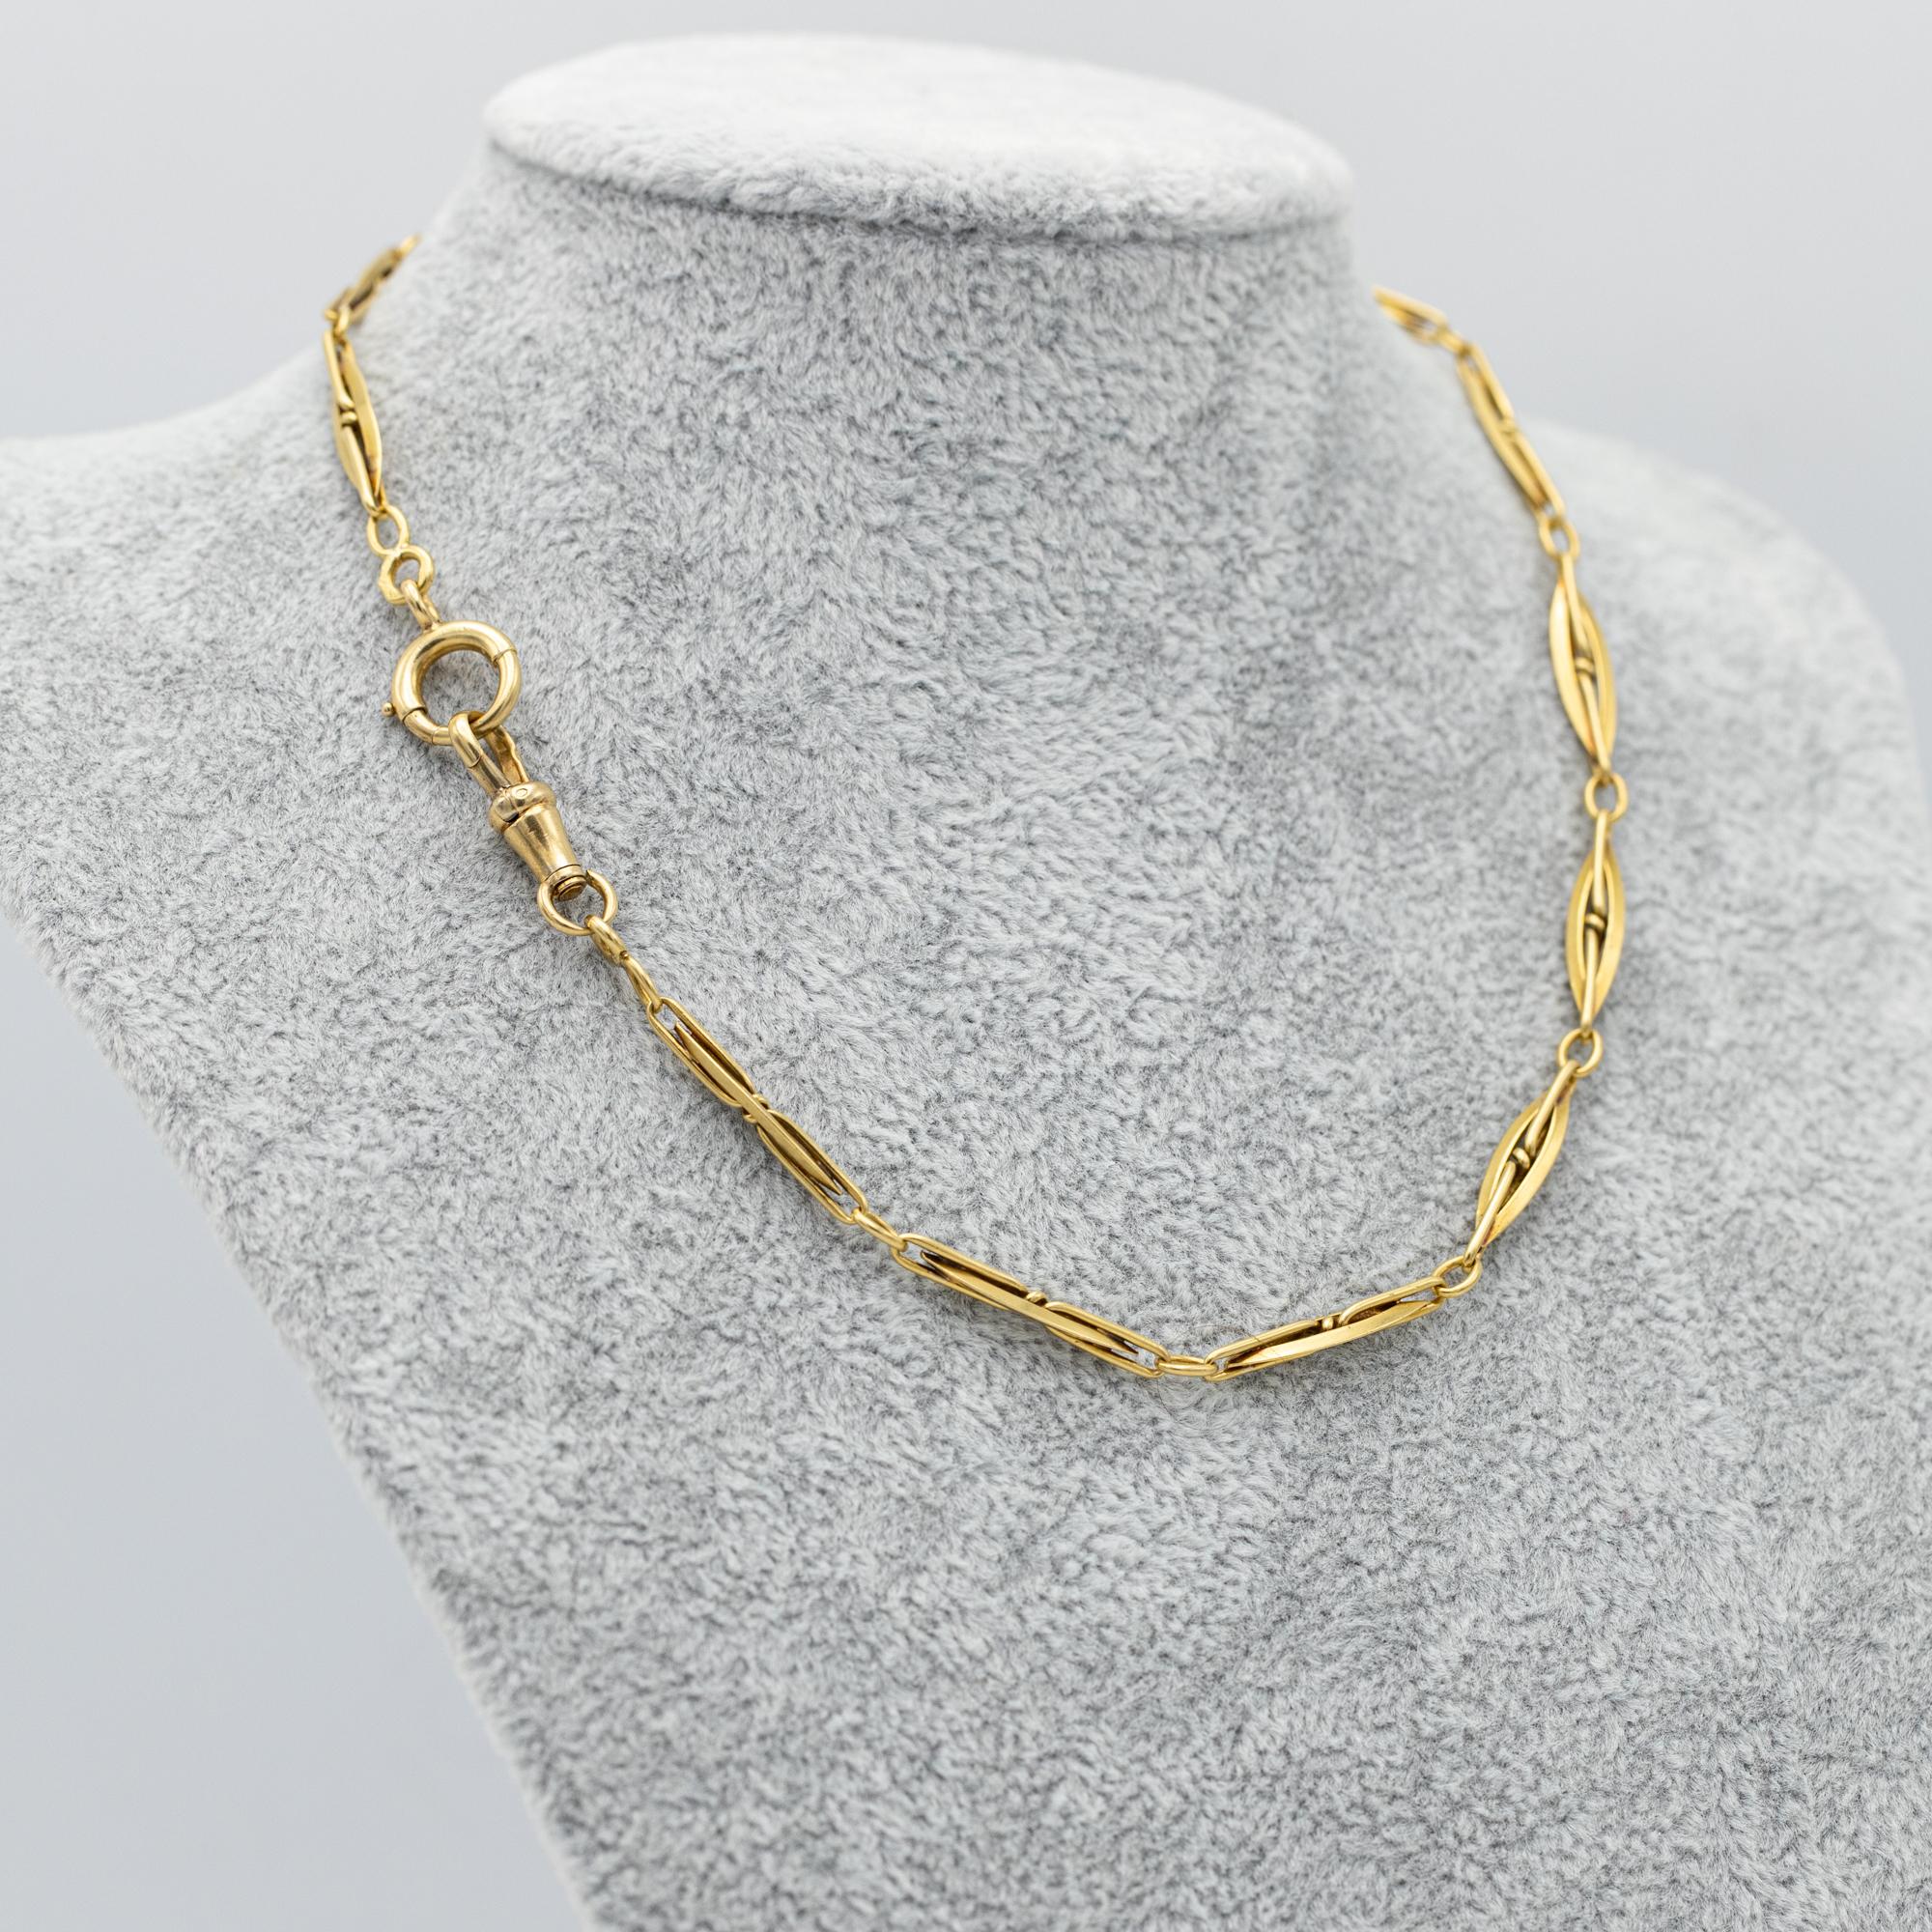 18K French solid gold watch chain - unique Antique Necklace - 15.35 Inch In Good Condition For Sale In Antwerp, BE